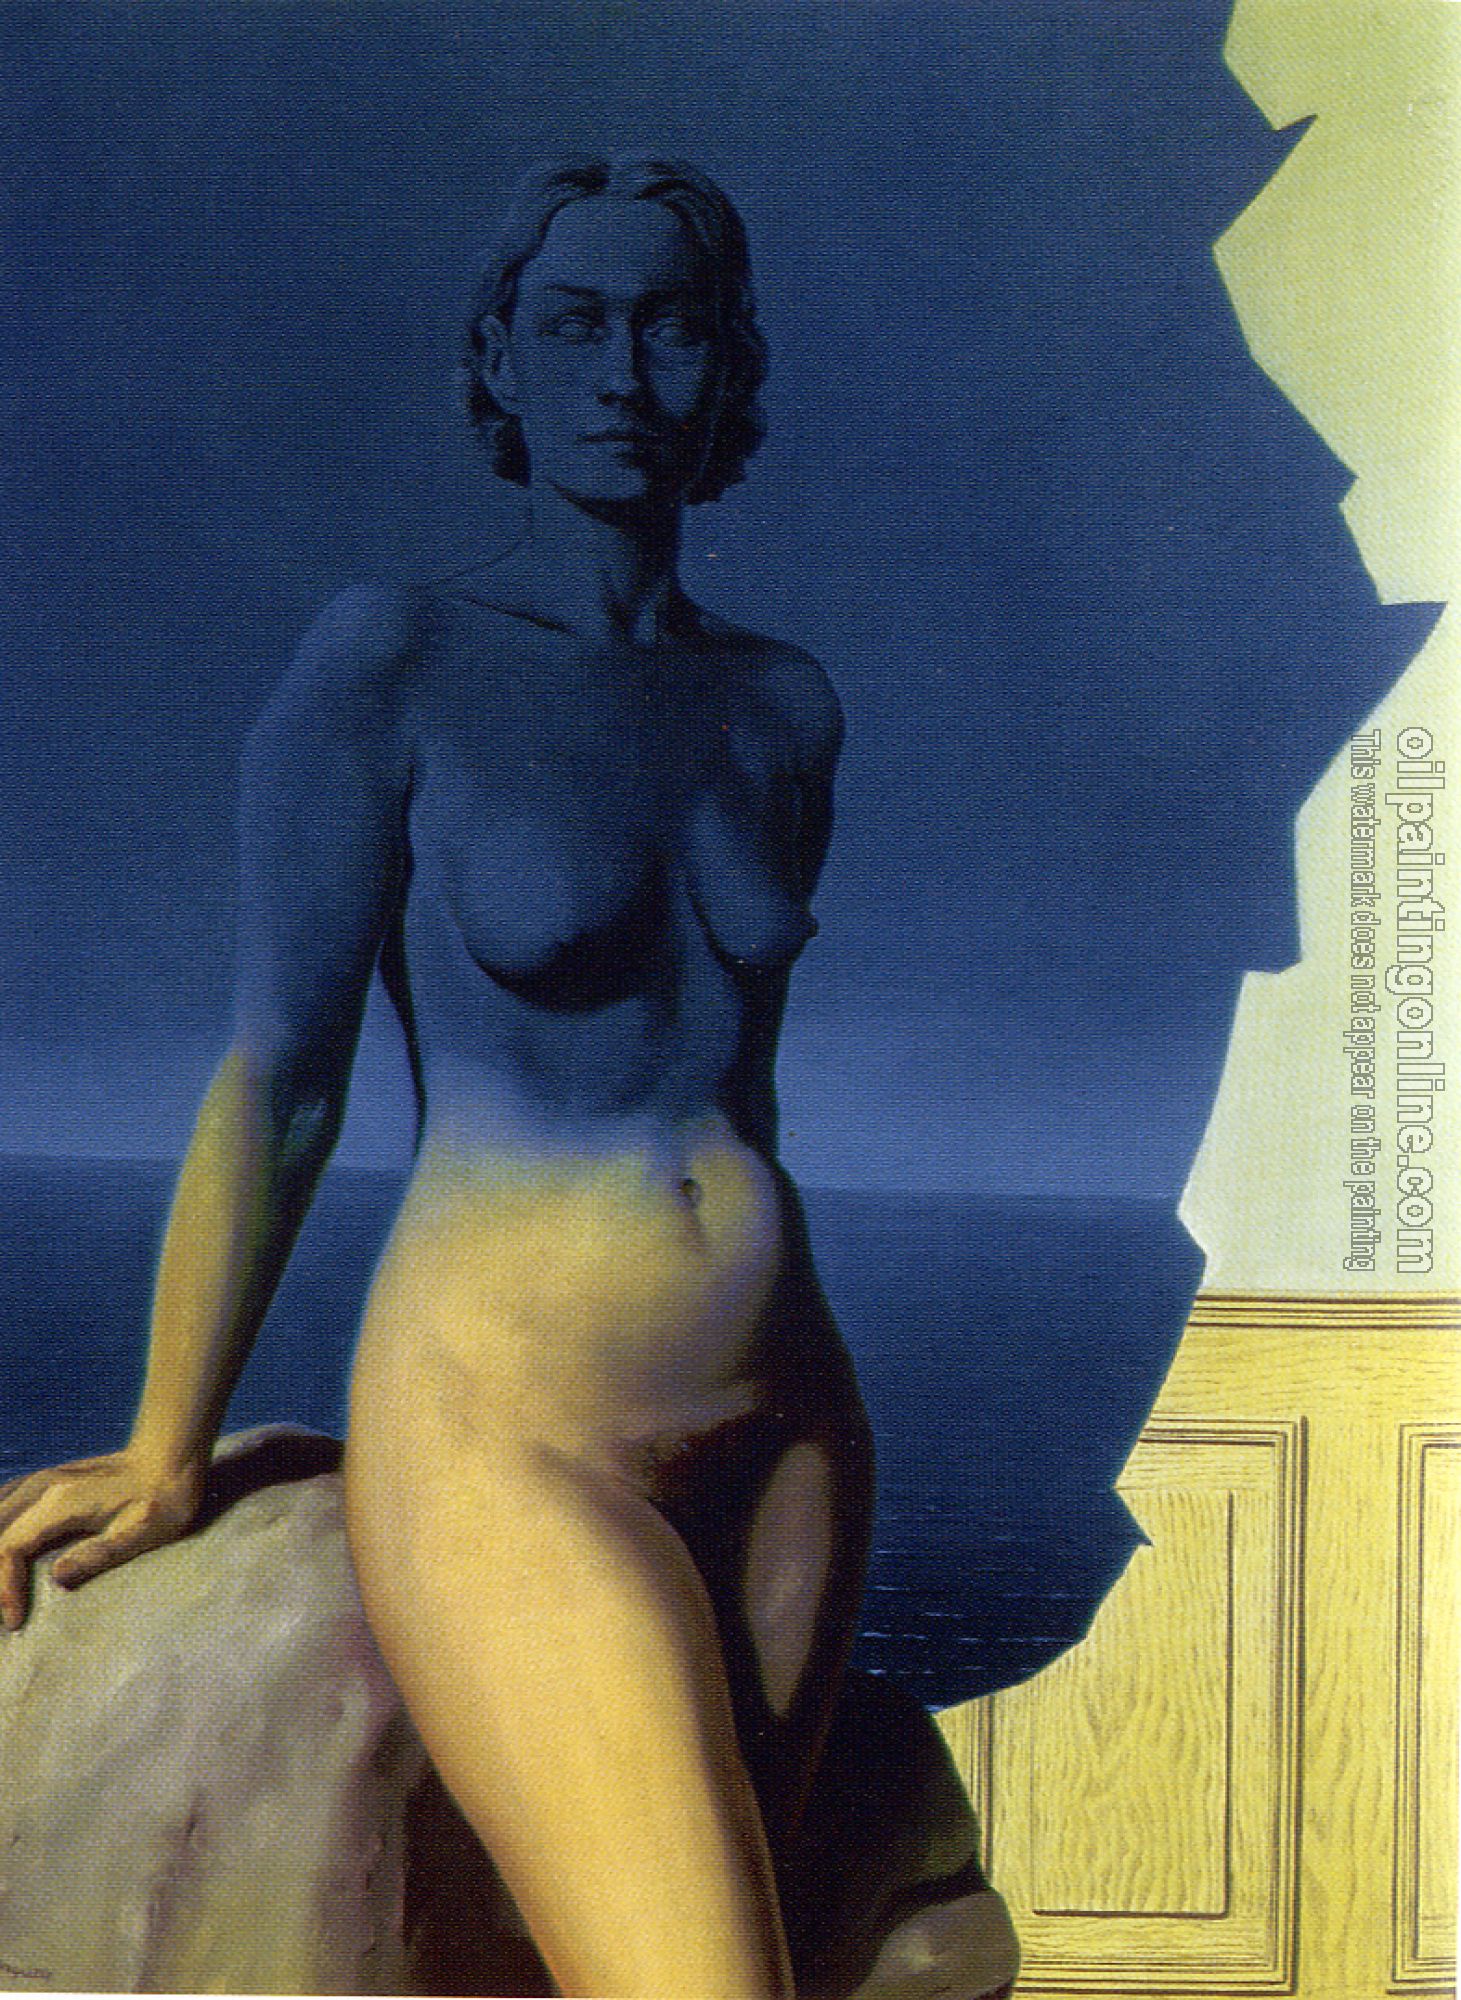 Magritte, Rene - the invasion